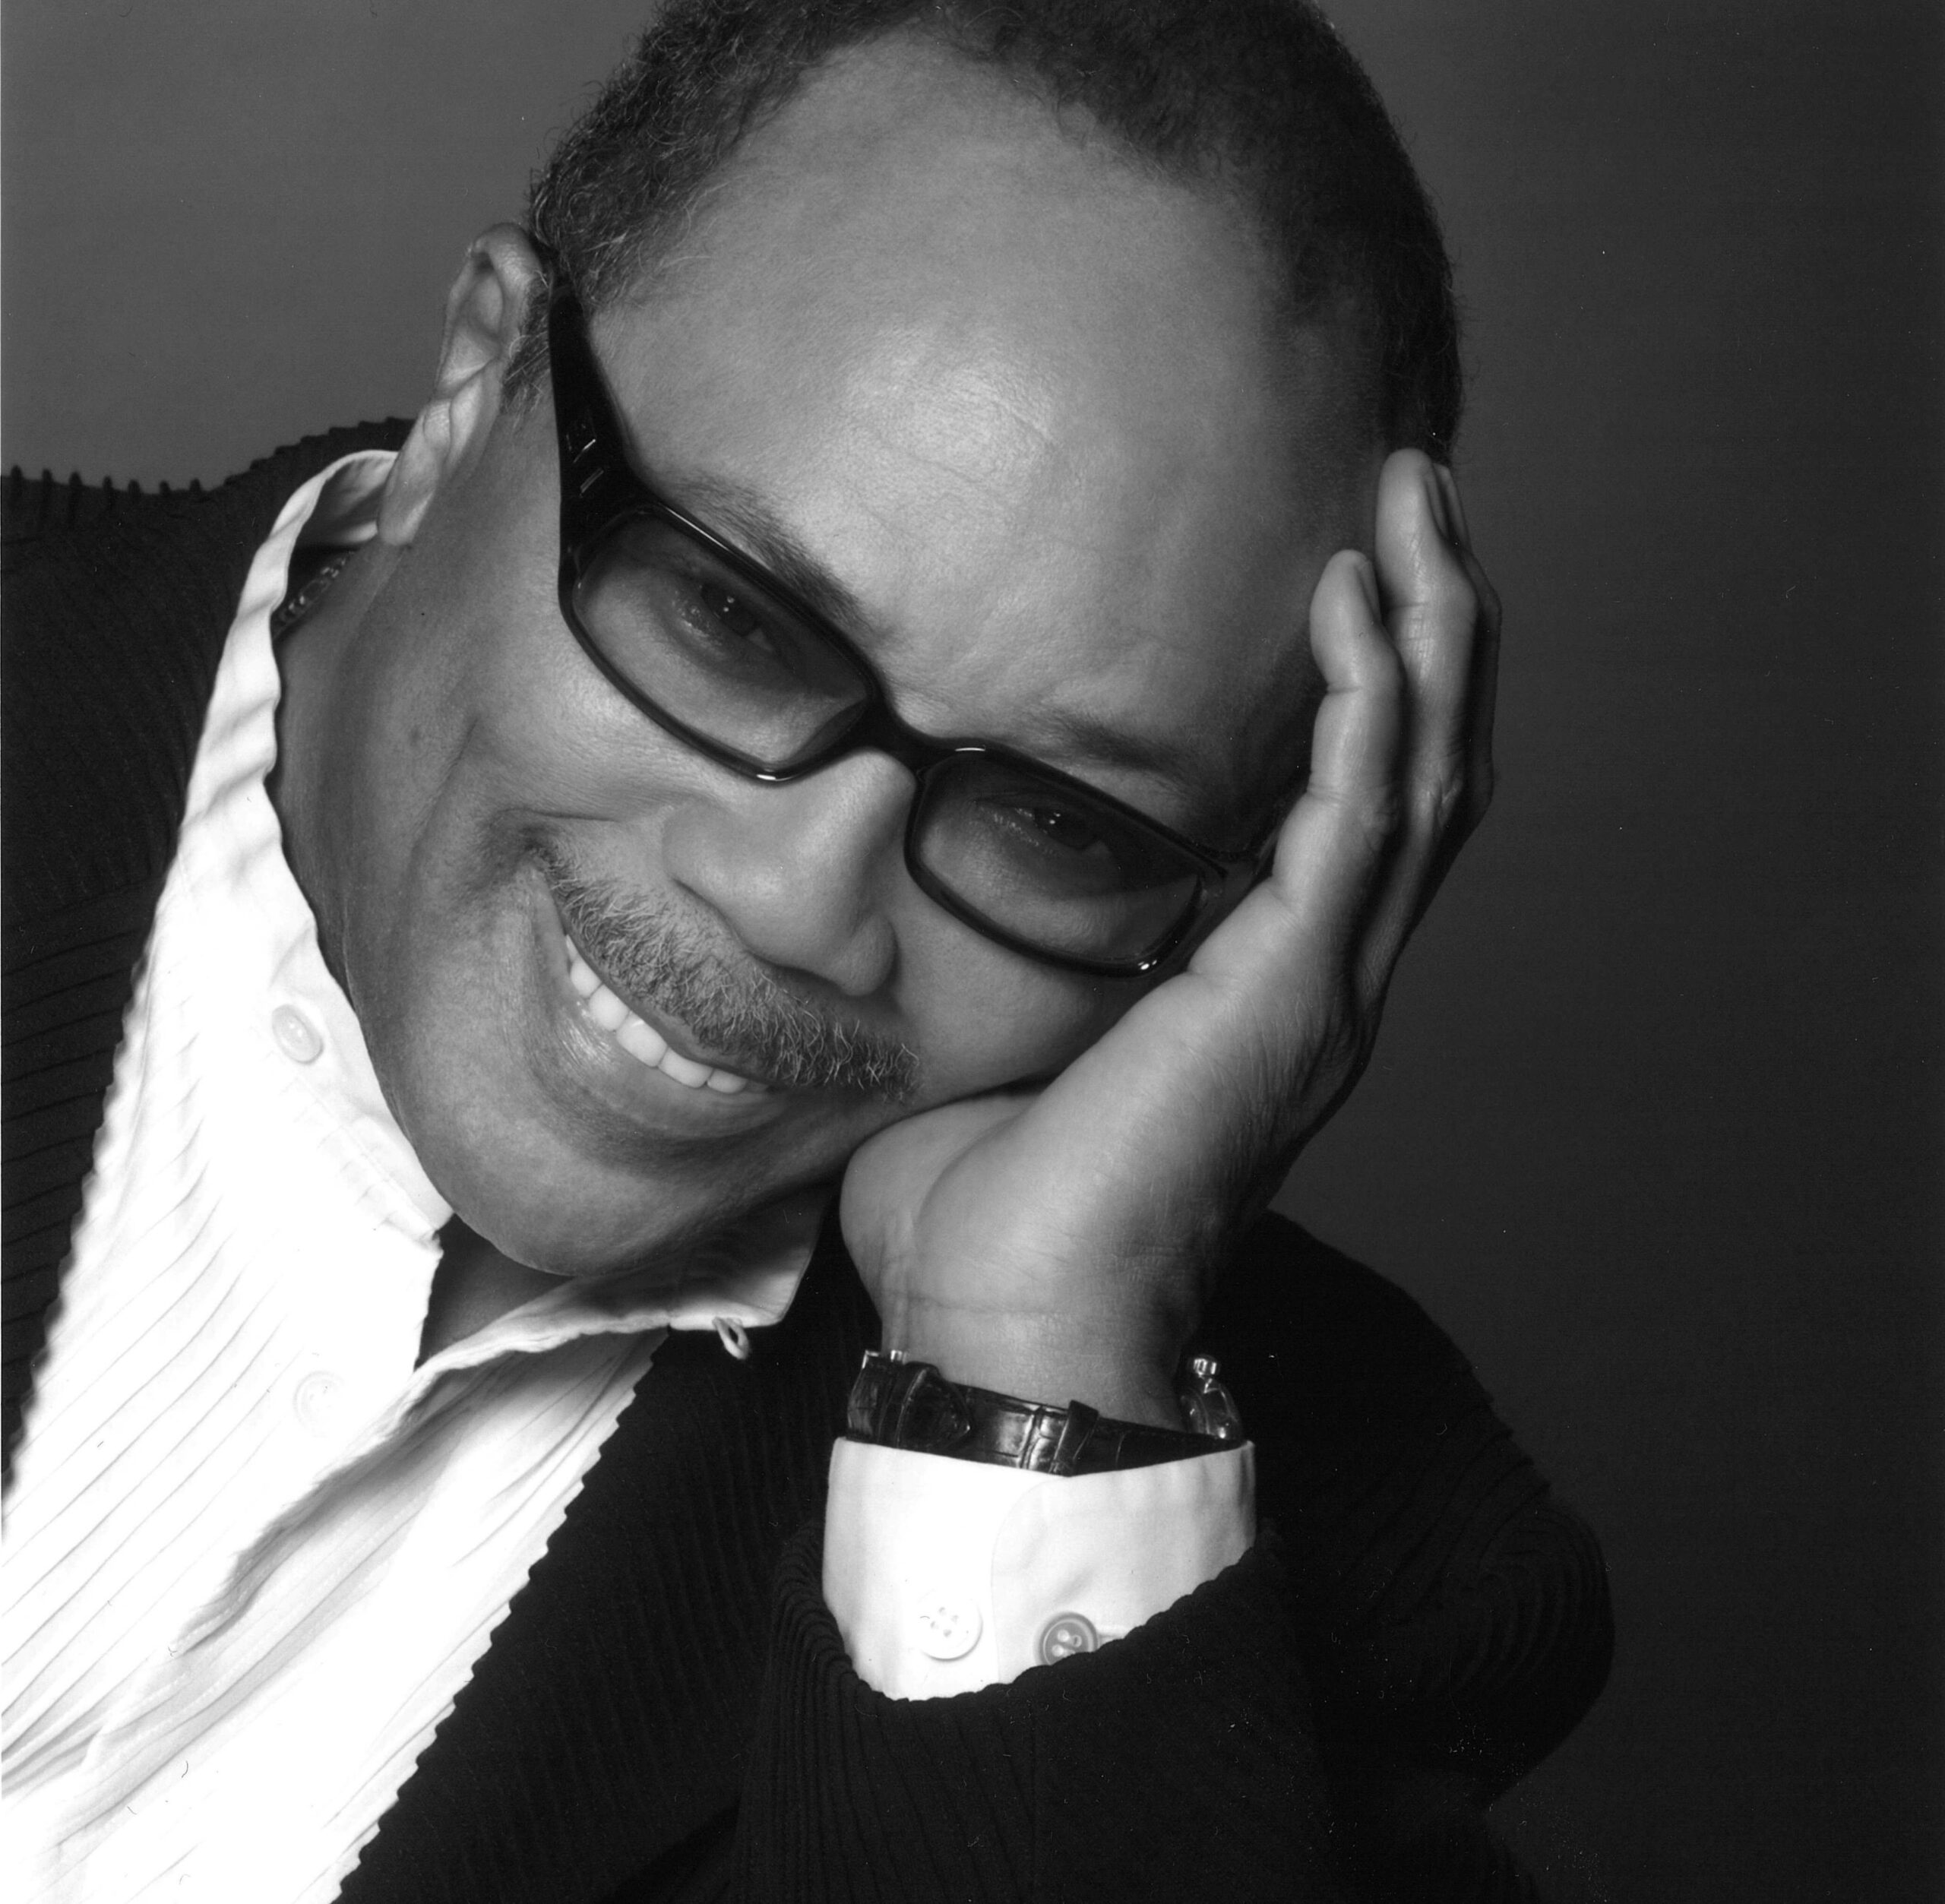 Headshot of a smiling Quincy Jones with thick-rimmed glasses and his head rested in palm.